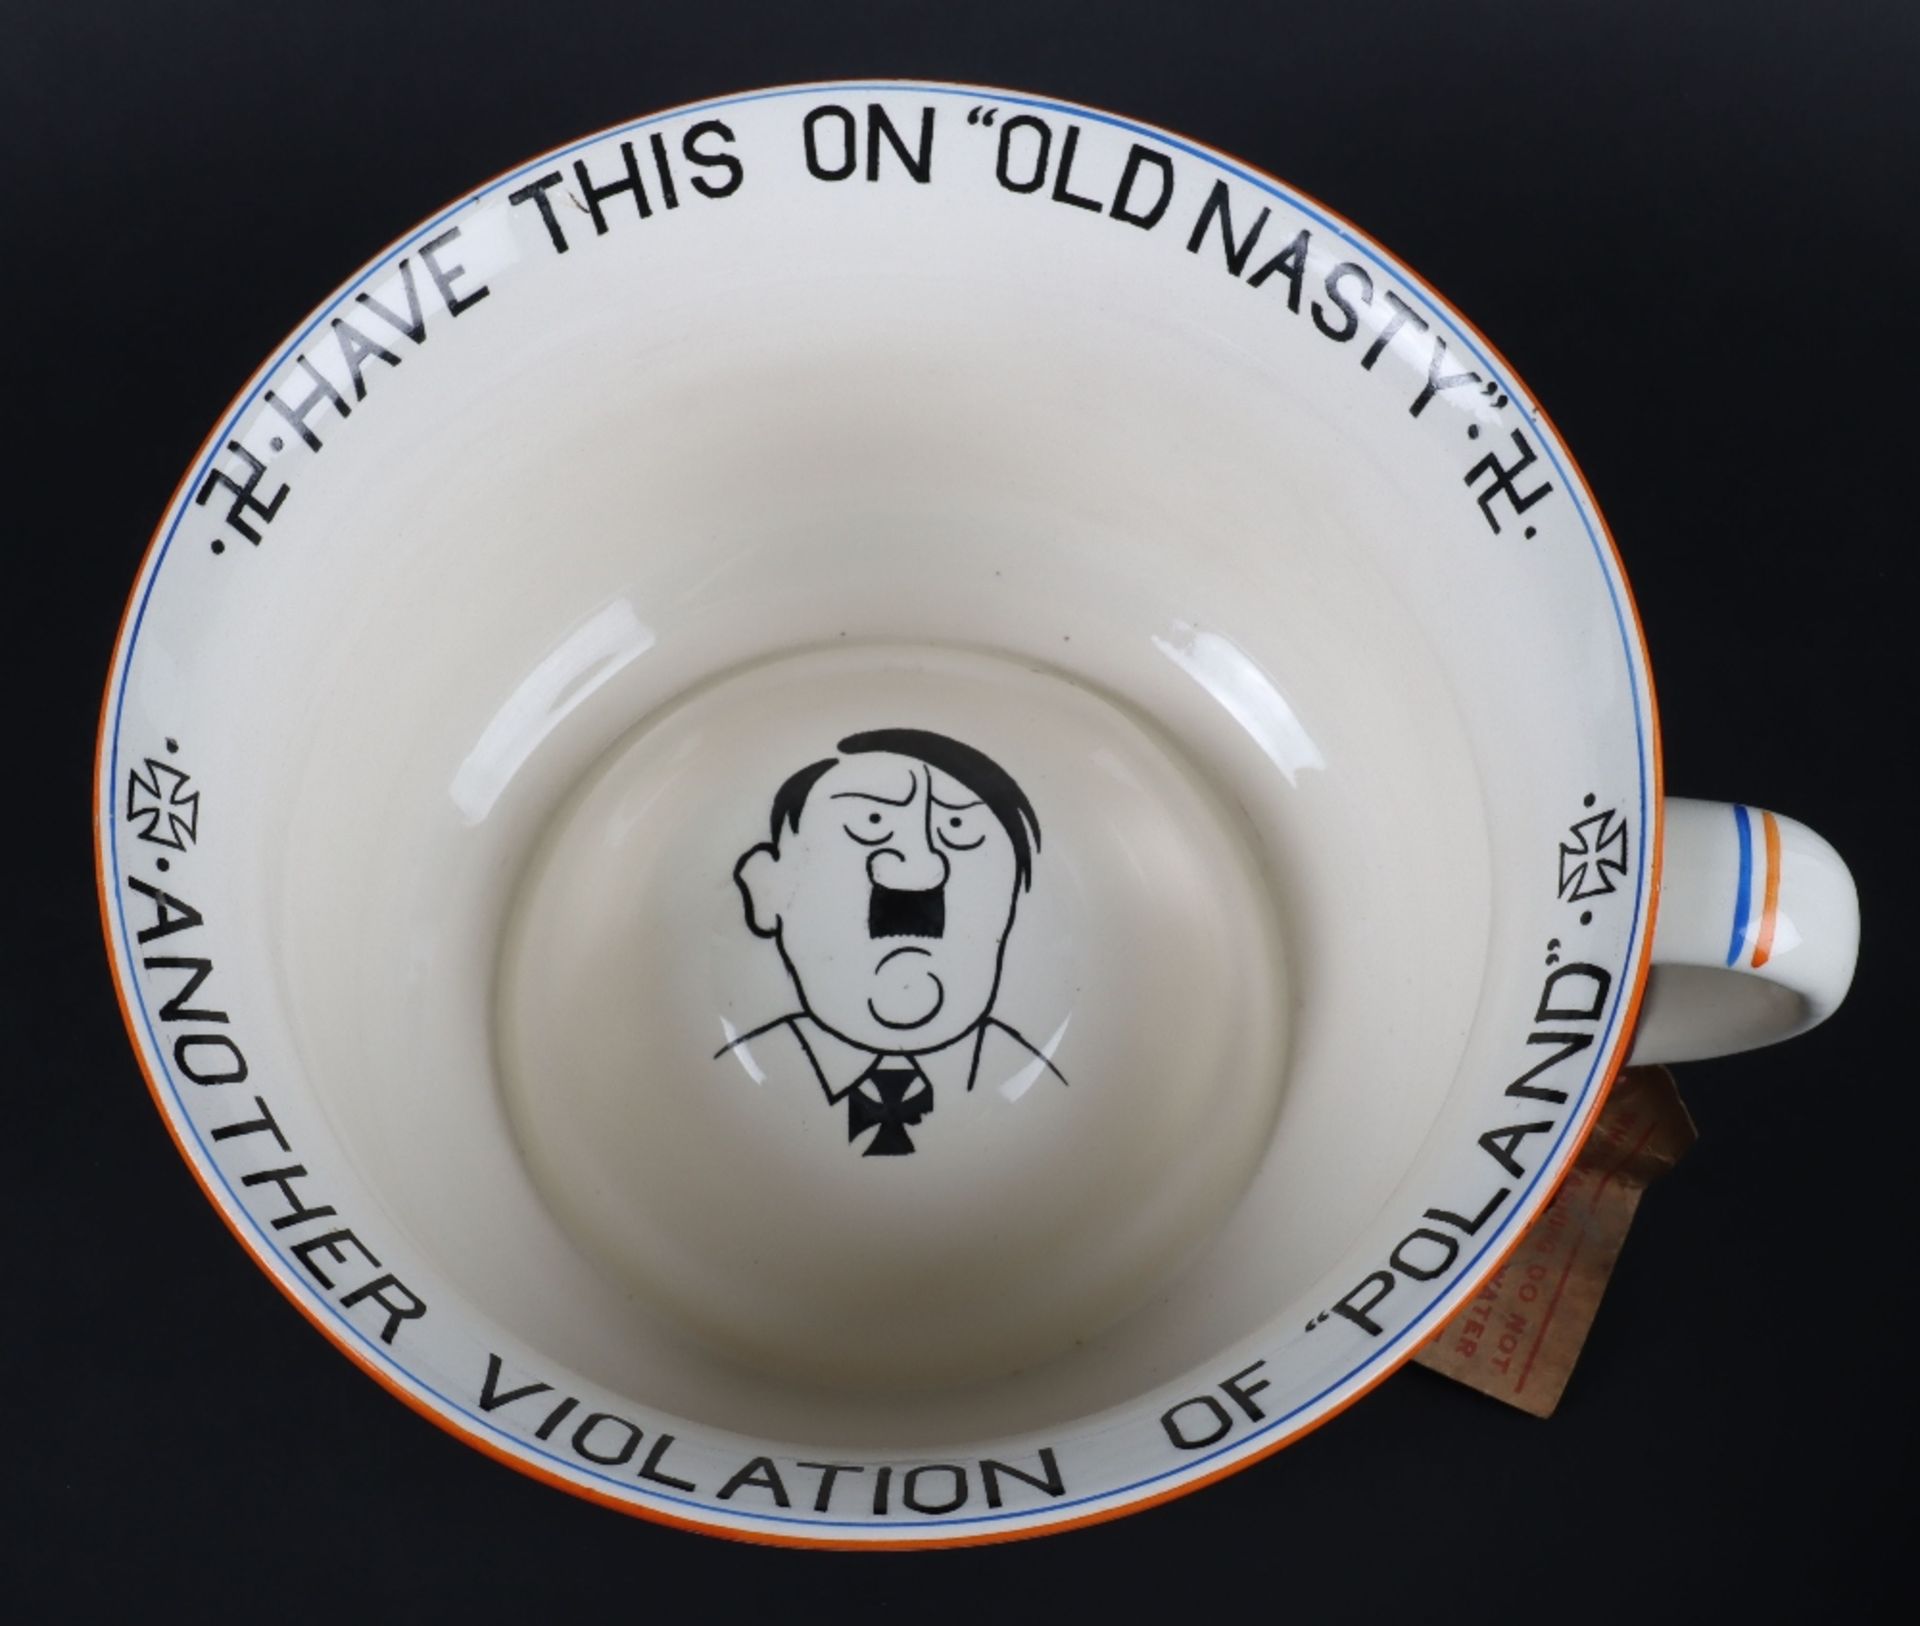 Fieldings Crown Devon WW2 Novelty Musical Chamber Pot, ‘No. 1 Jerry’, Have This On Old Nasty